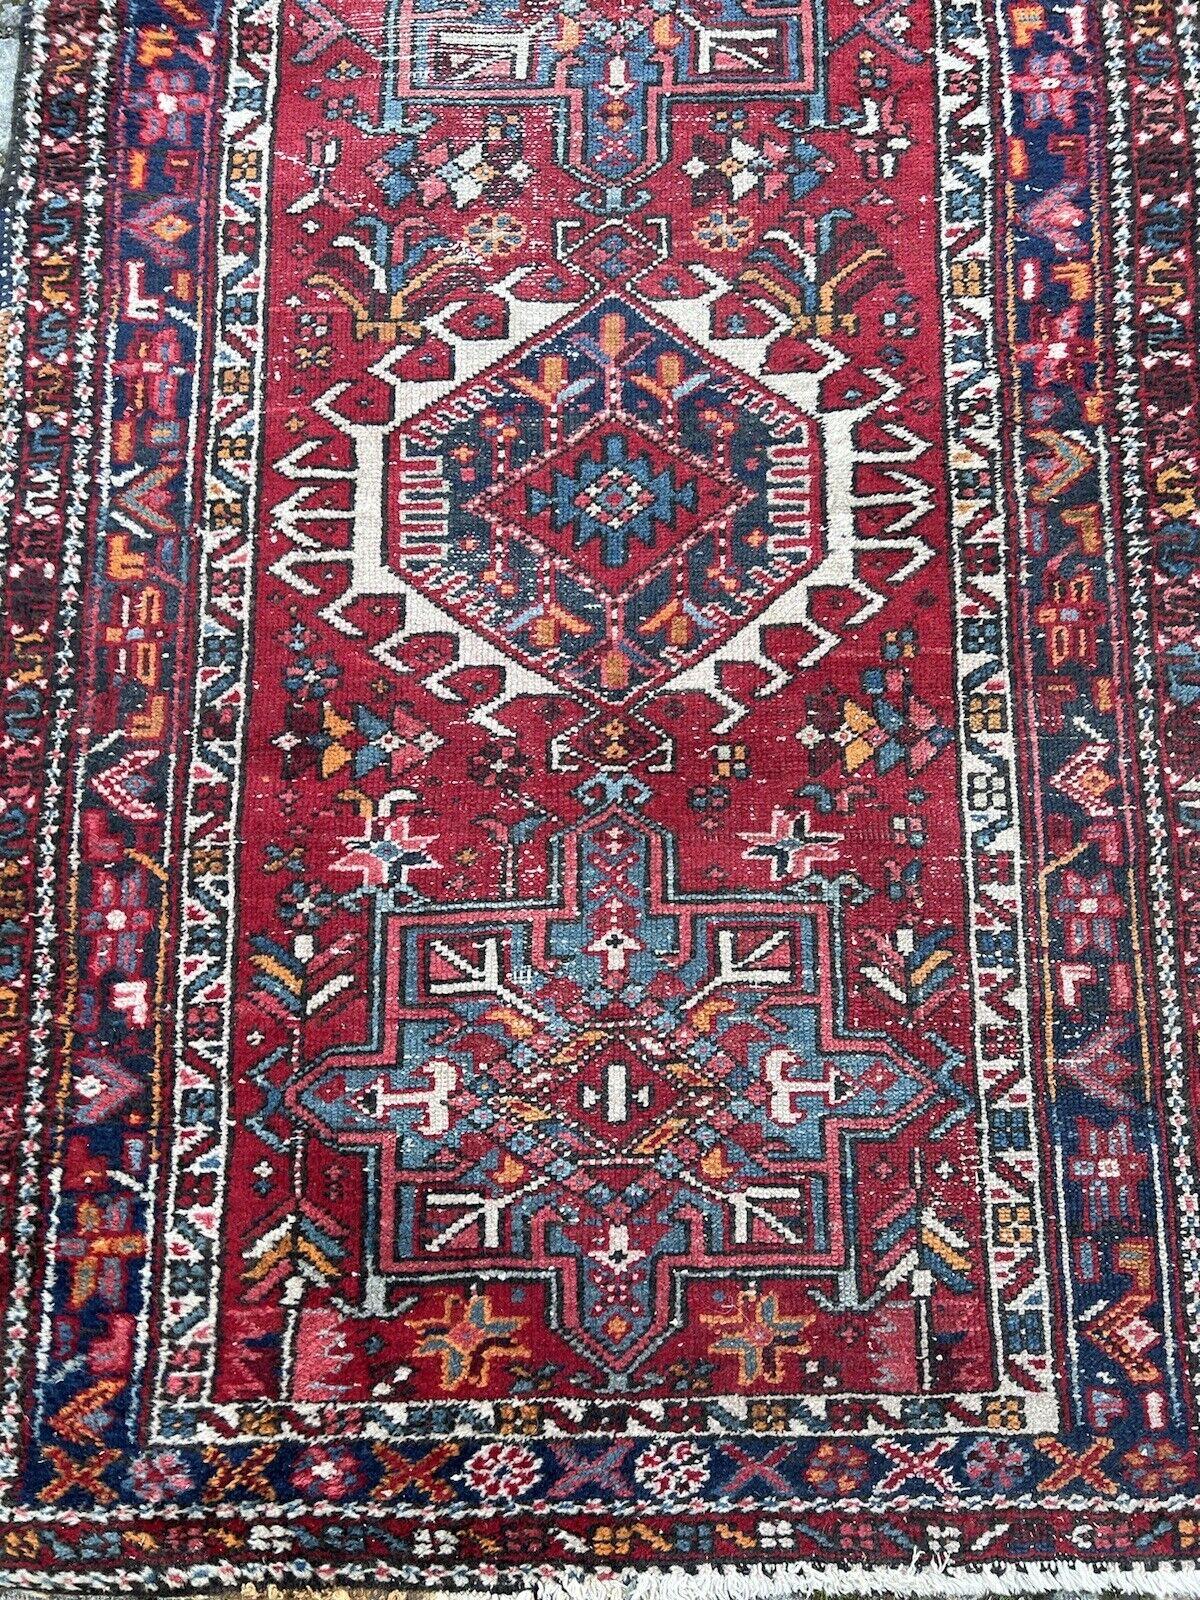 Early 20th Century Handmade Antique Persian Style Karajeh Runner Rug 2.9' x 11.2', 1920s - 1S57 For Sale